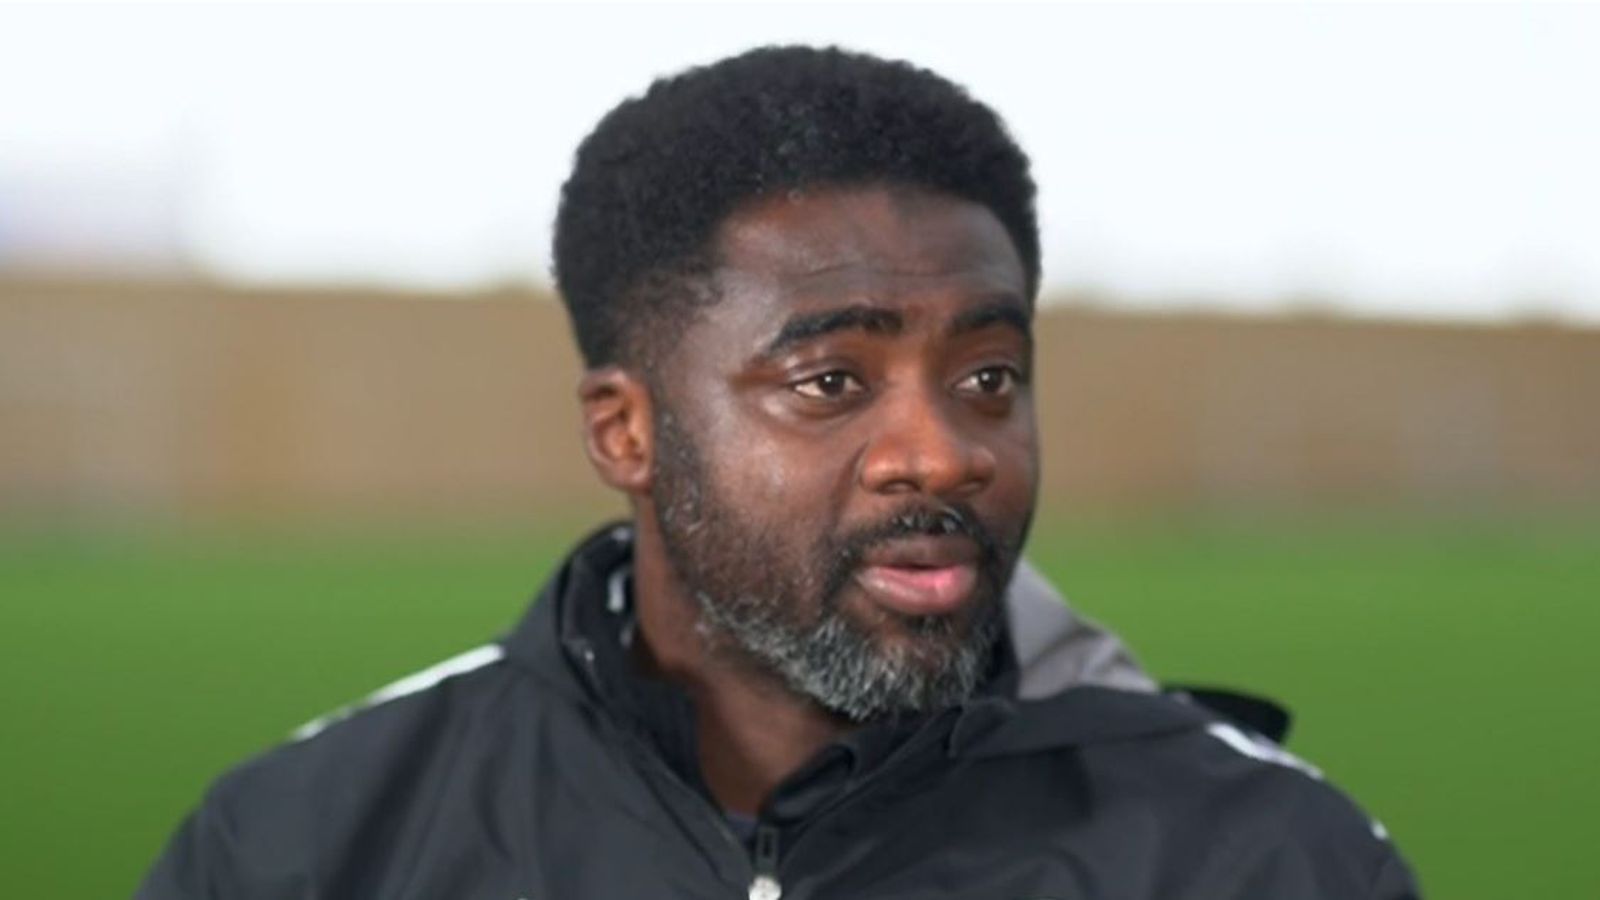 Leicester City first-team coach Kolo Toure reveals challenges of playing while fasting during Ramadan | Football News | Sky Sports